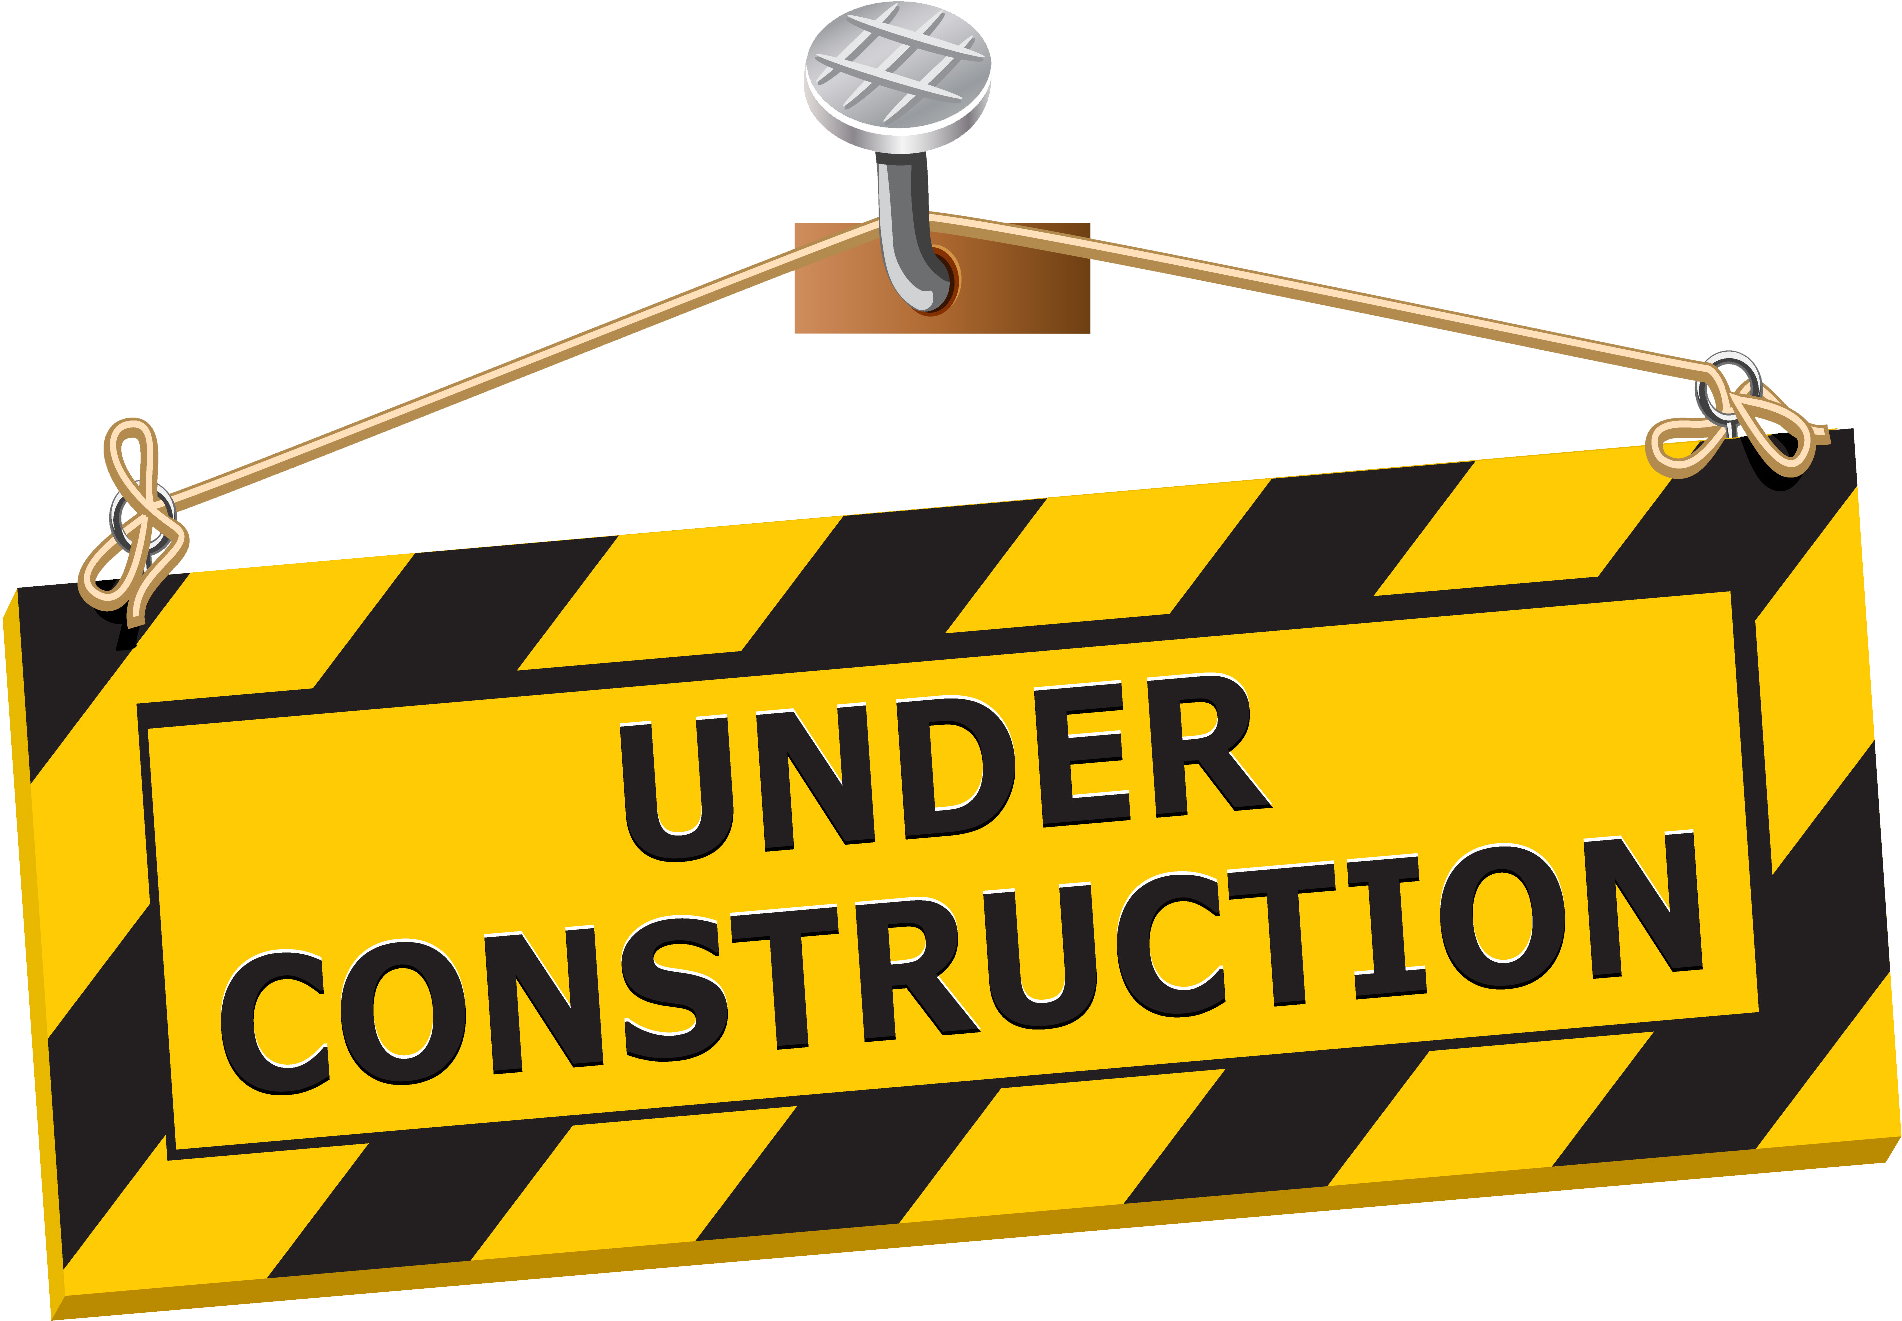 Under Construction Sign PNG HD Quality